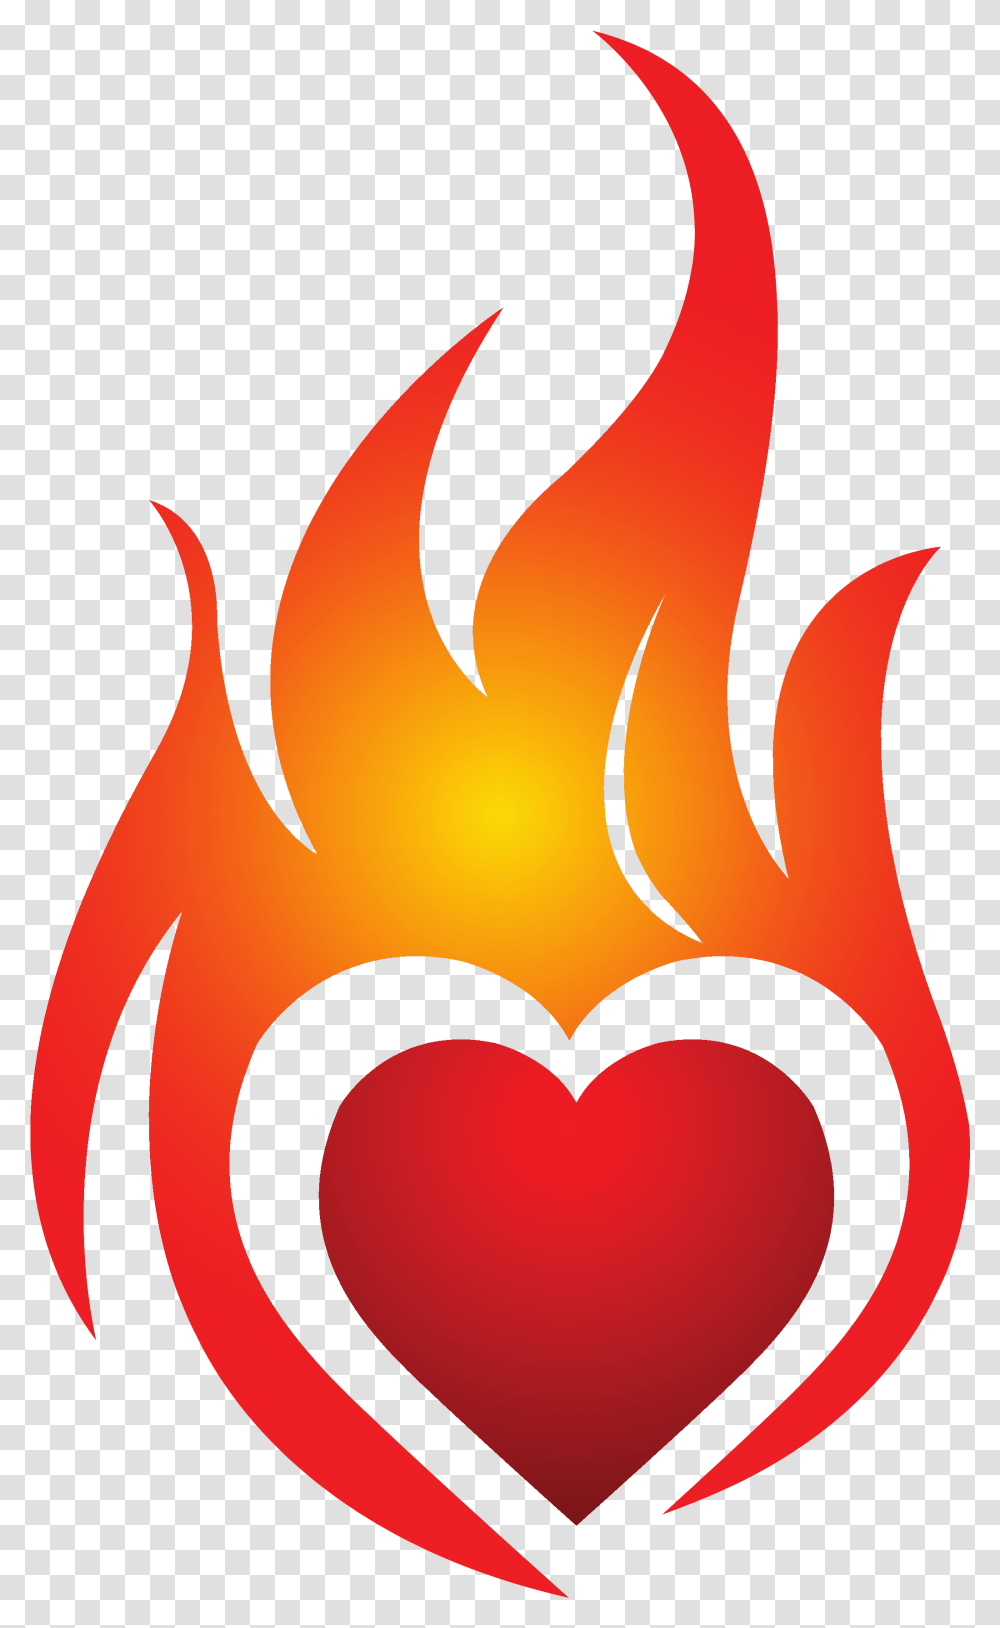 Download 28 Collection Of Heart Heart On Heart On Fire Logo, Flame, Bonfire Transparent Png